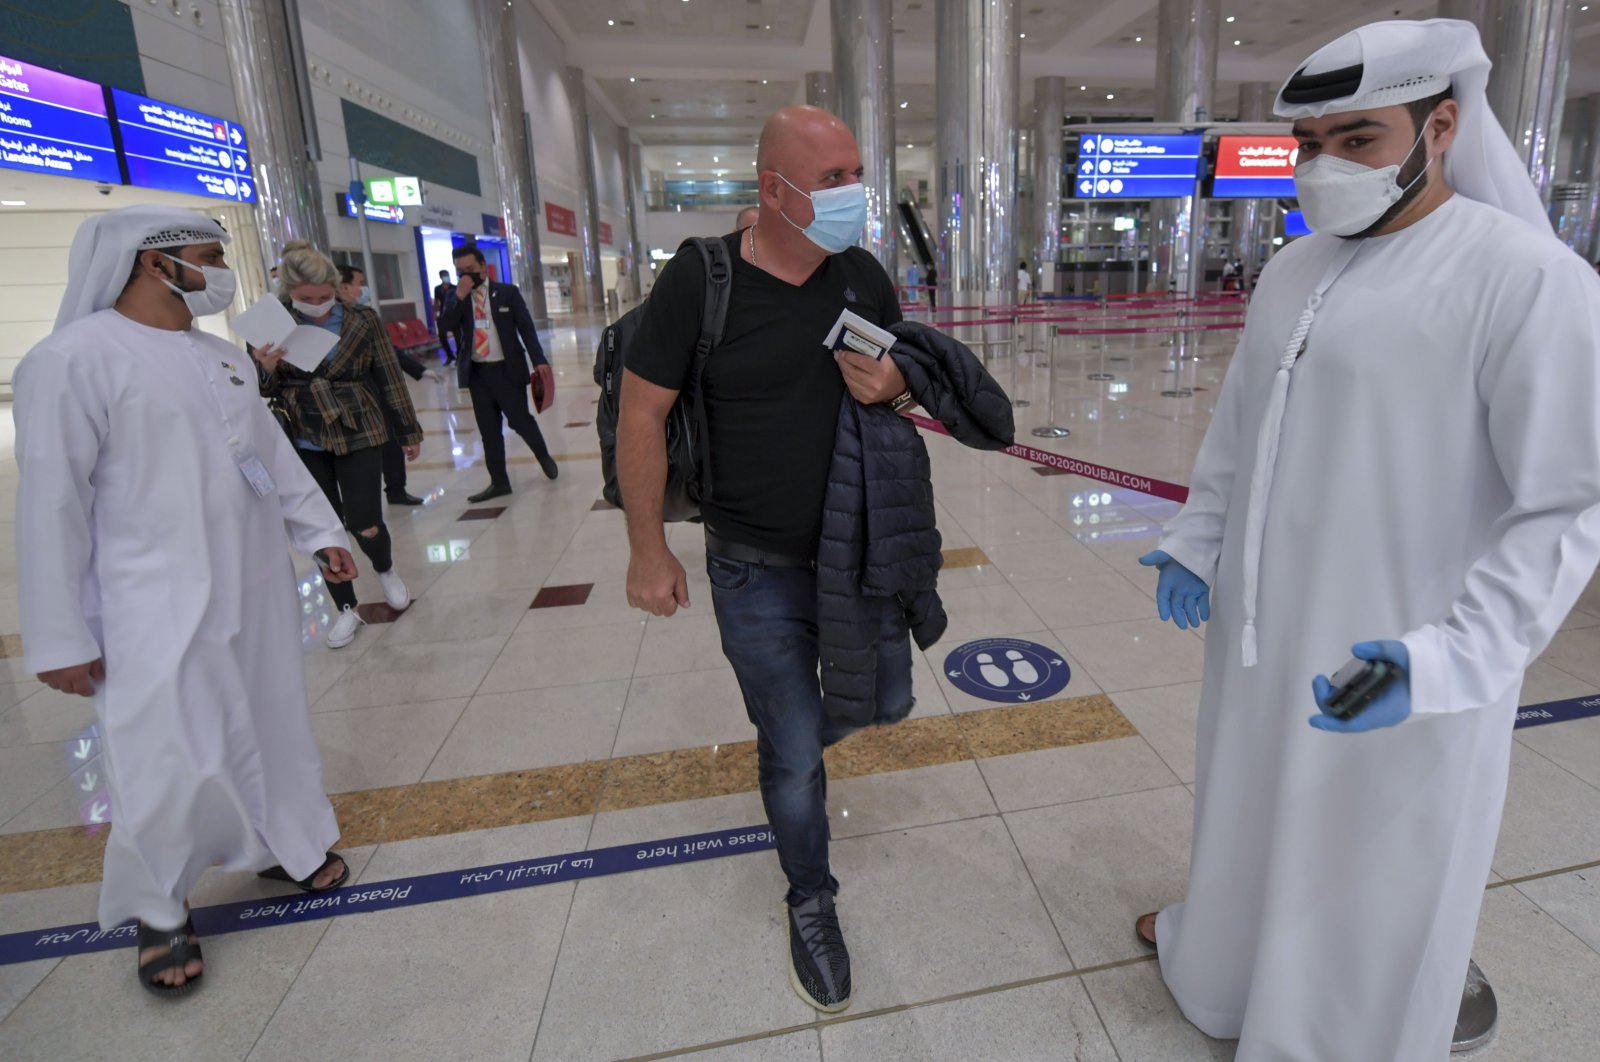 An Israeli man walks past Emirati staff after passport control upon arrival from Tel Aviv to the Dubai airport in the United Arab Emirates (UAE), on Nov. 26, 2020. (AFP Photo)